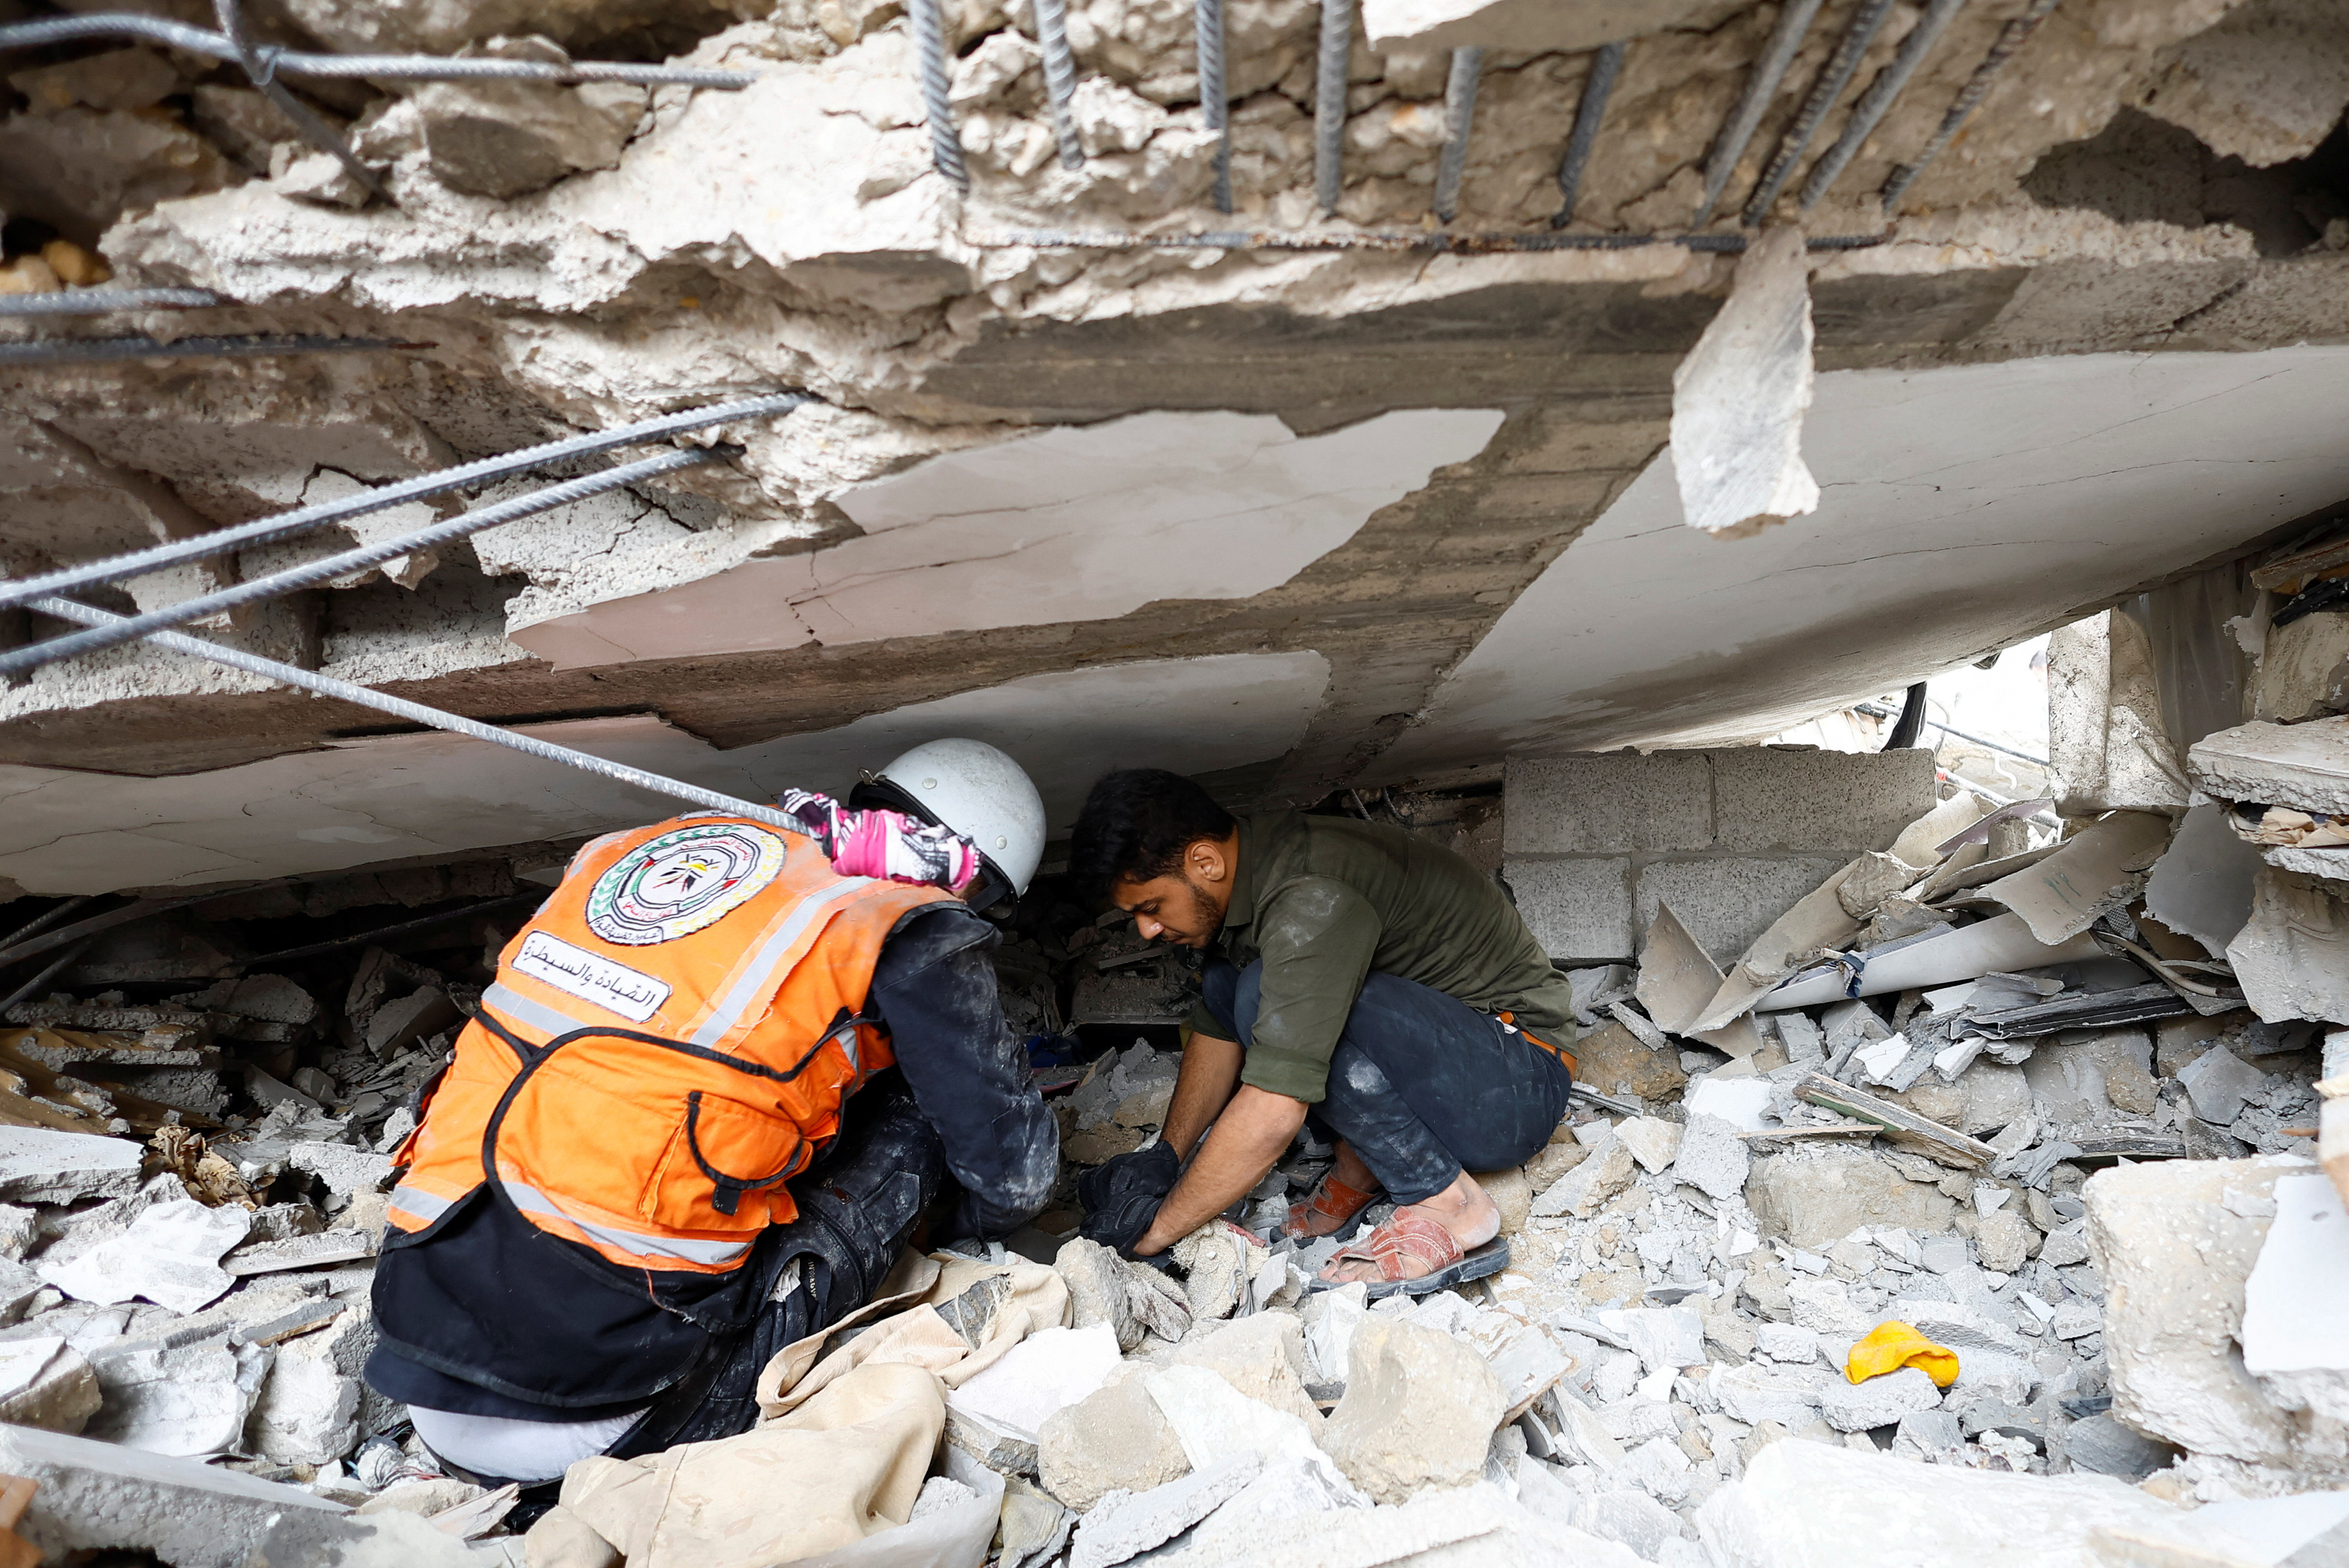 Emergency personnel and people check the damage at the site of Israeli strikes on houses in Khan Younis